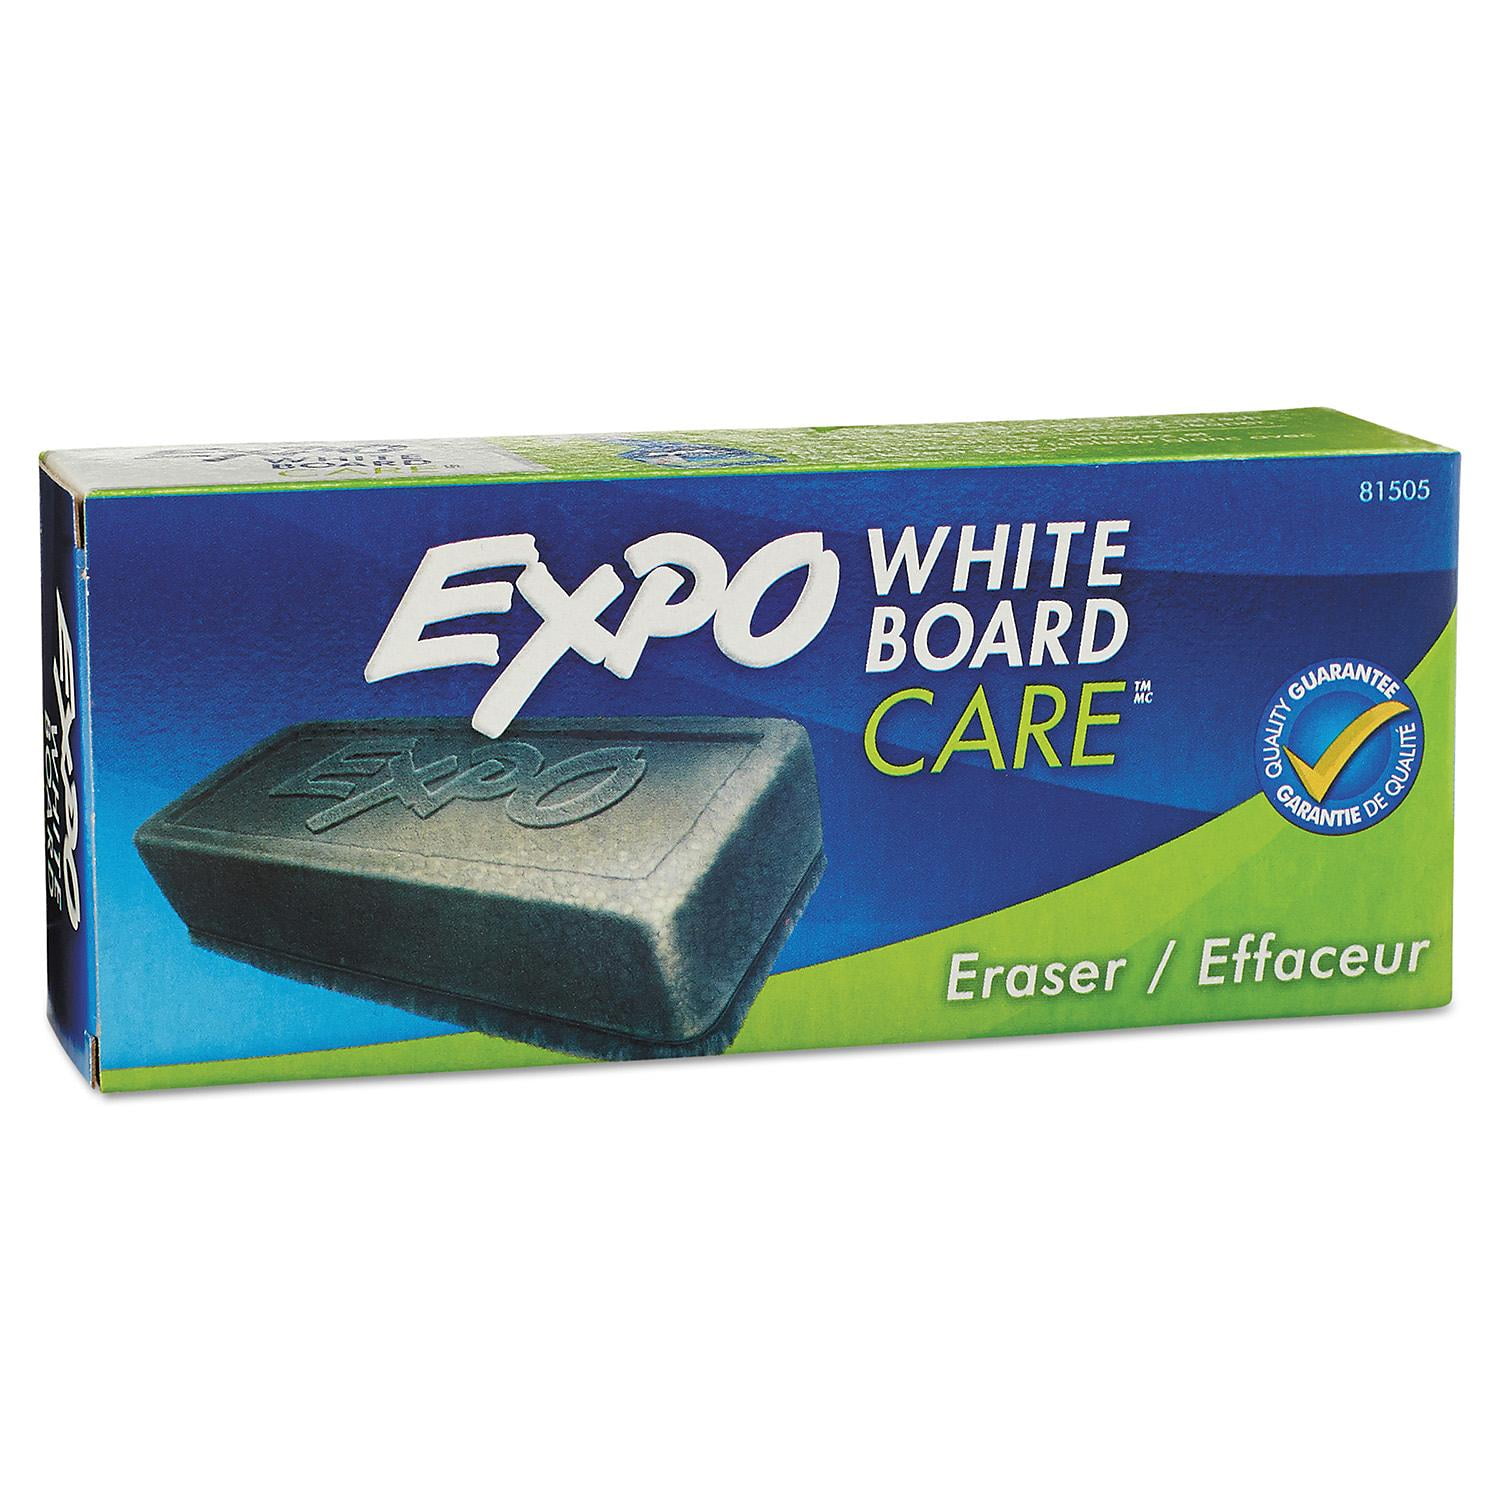 Soft Pile 5 1/8w x 1 1/4h white board care 81505 2 pack EXPO®Dry Erase Eraser 